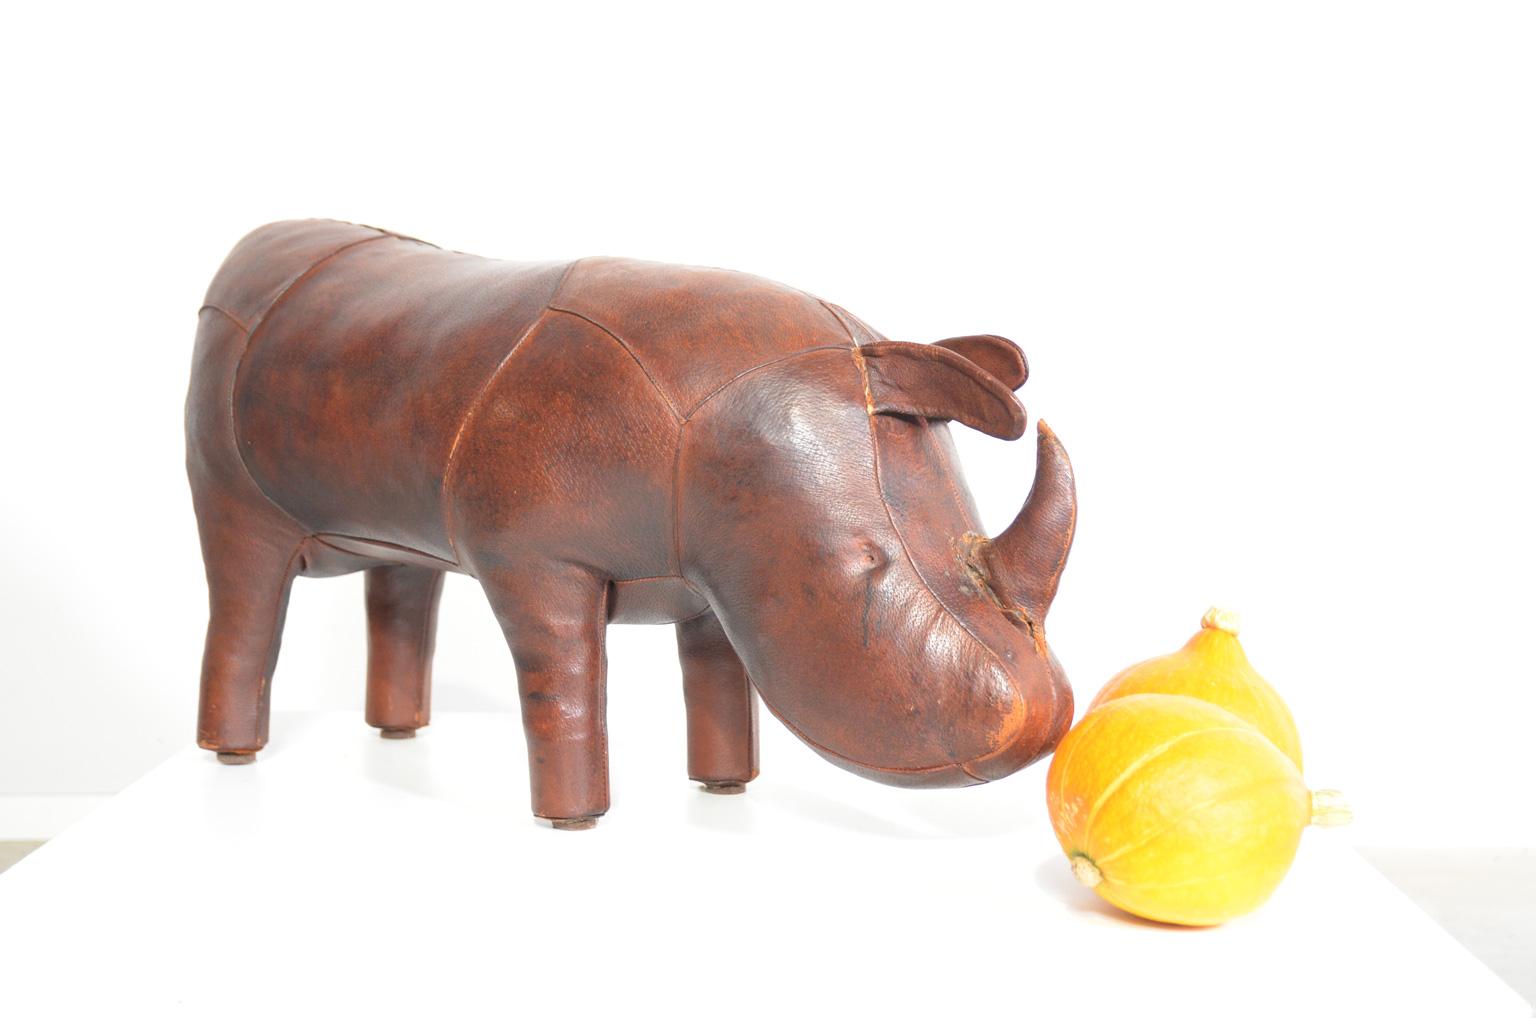 The first Omersa footstool was a pig made in the 1920s from leather leftover from the production of hand luggage. This pig was sold through Liberty’s in London and has been ever since. From the 1960s different animals have been produced, including